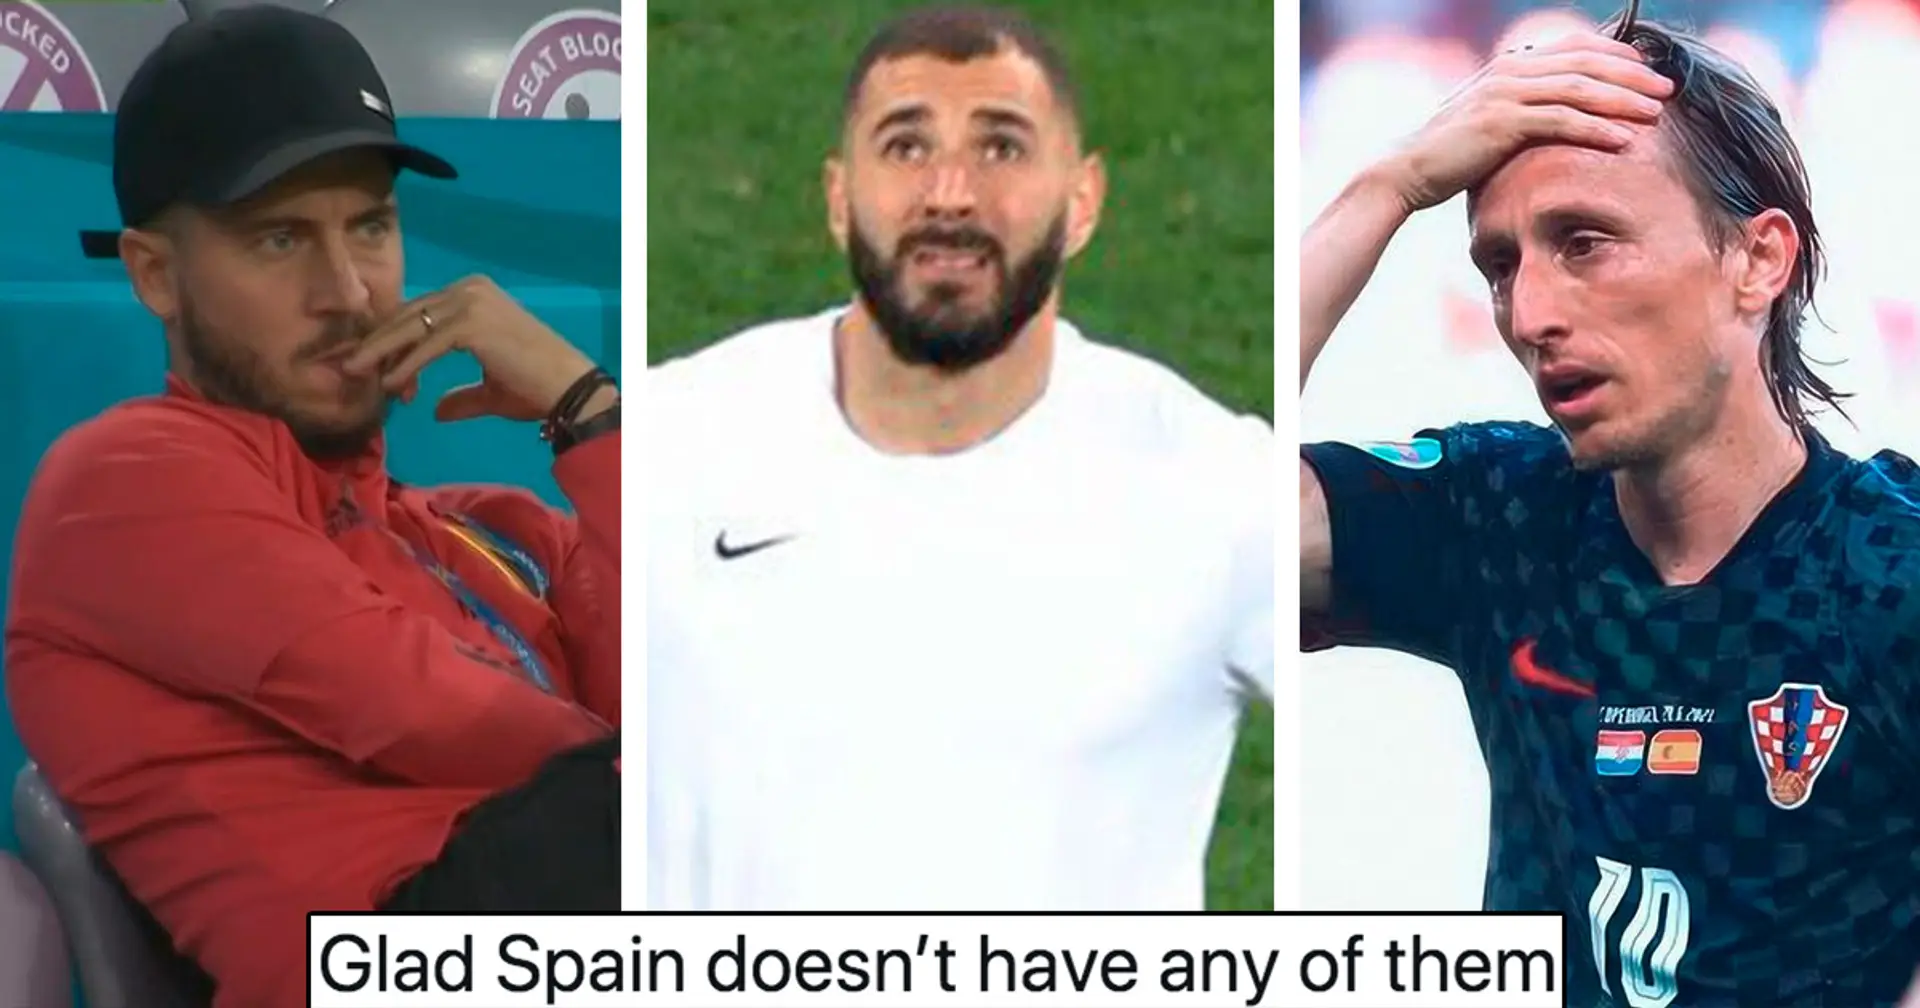 'That trophyless DNA man, it's real': Cules and neutrals react as all Real Madrid players now eliminated from Euros